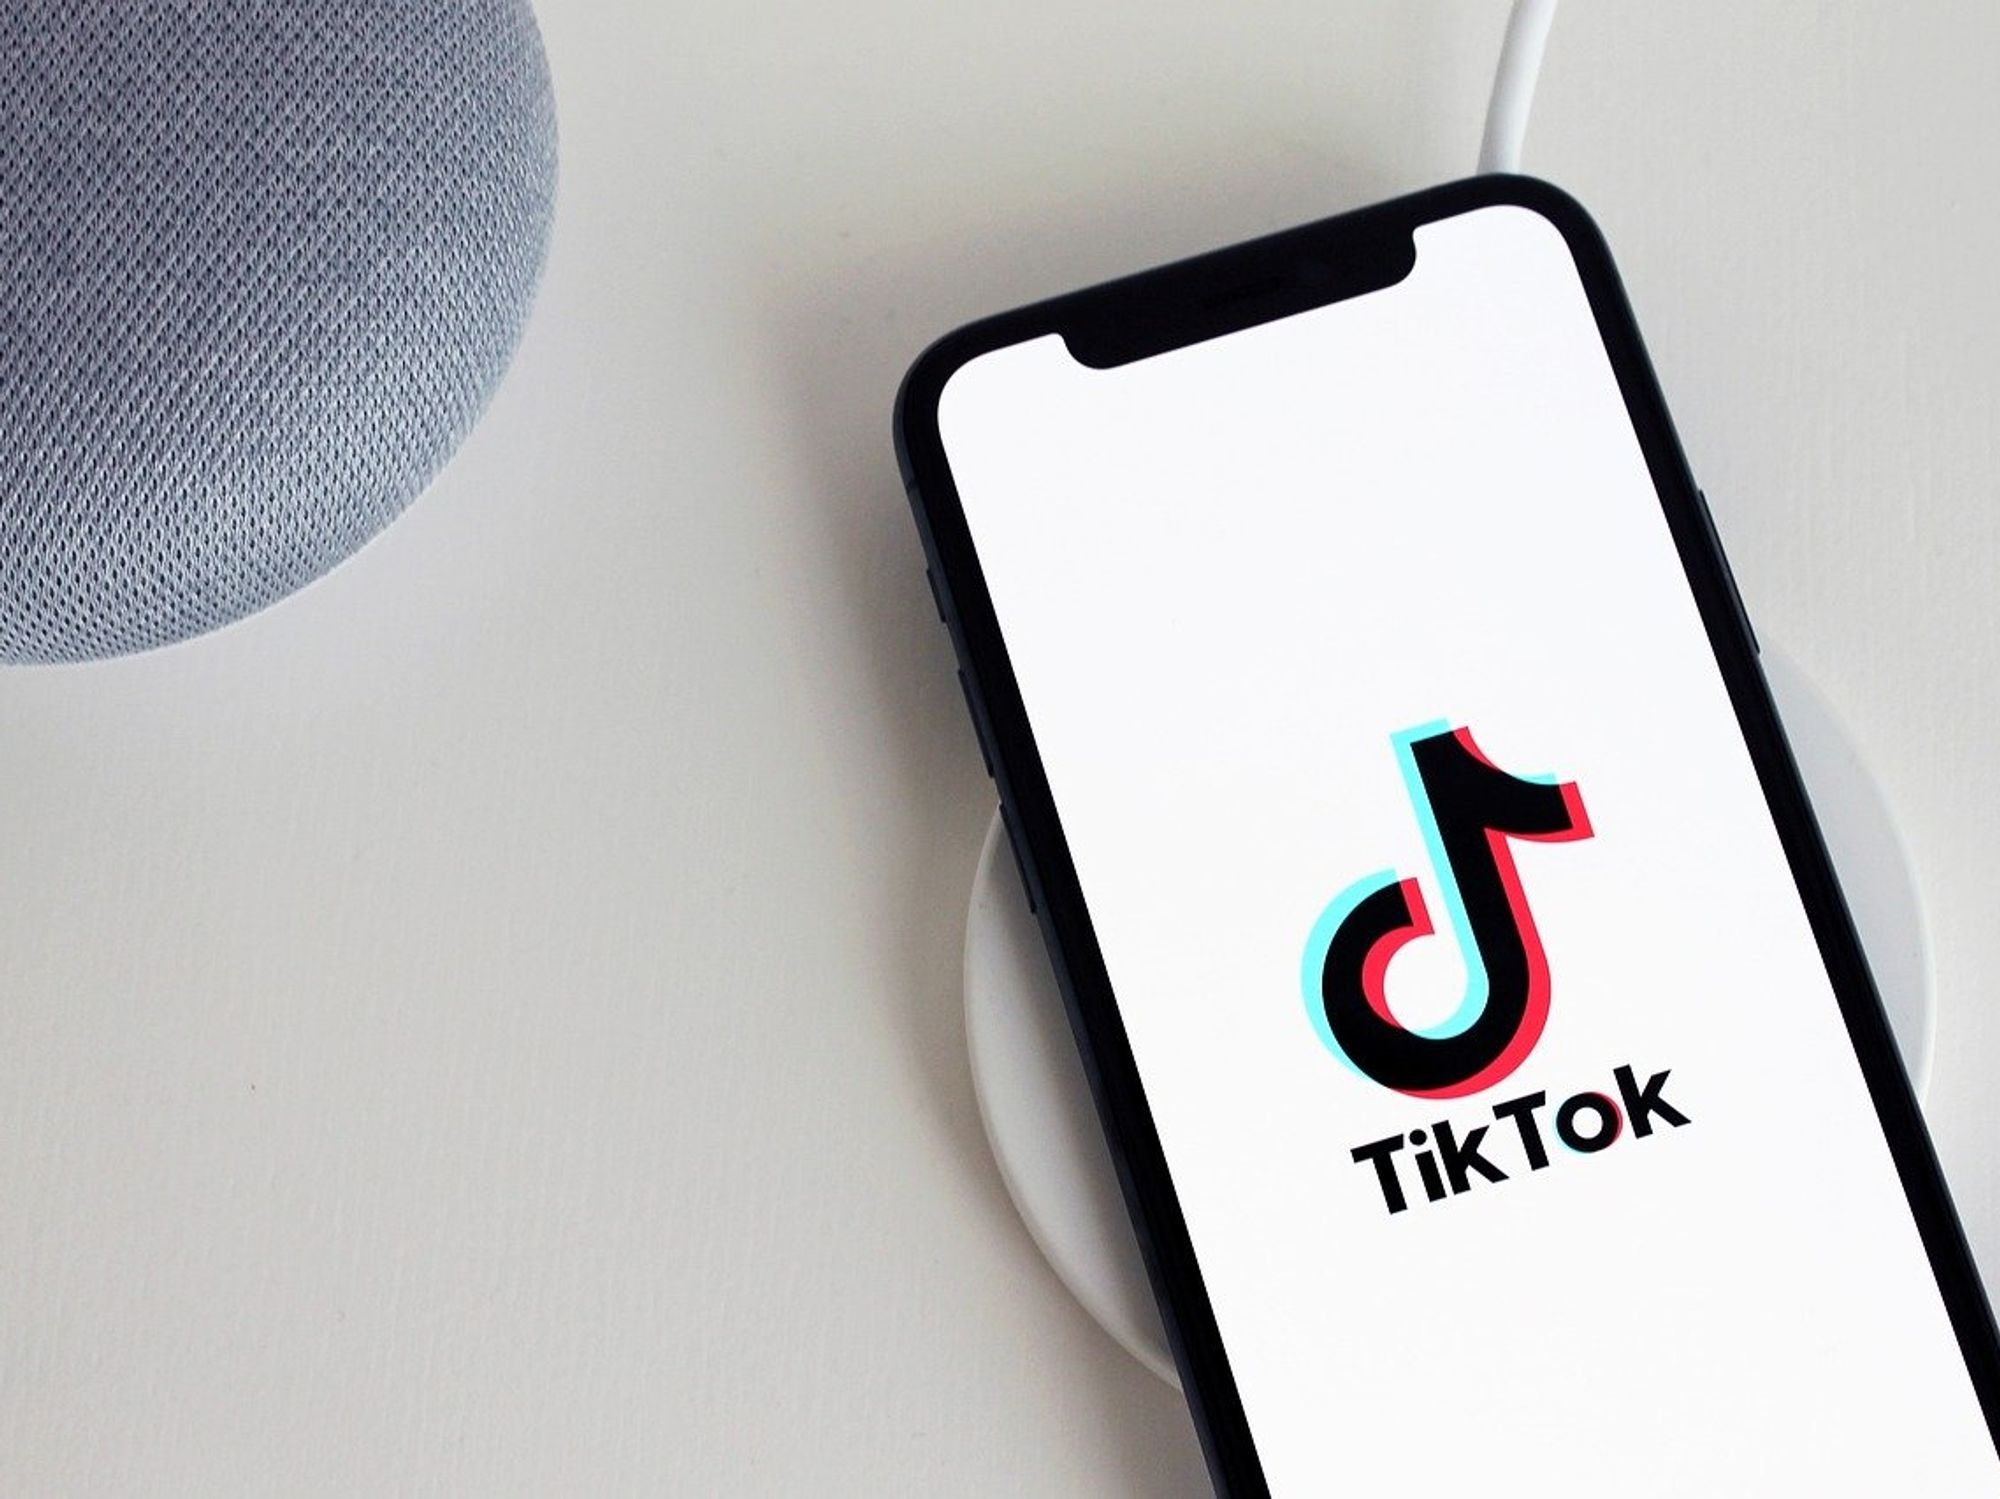 'They're Being Sued All Over the Place.' TikTok Comes Under More Scrutiny Over Children's Privacy Concerns